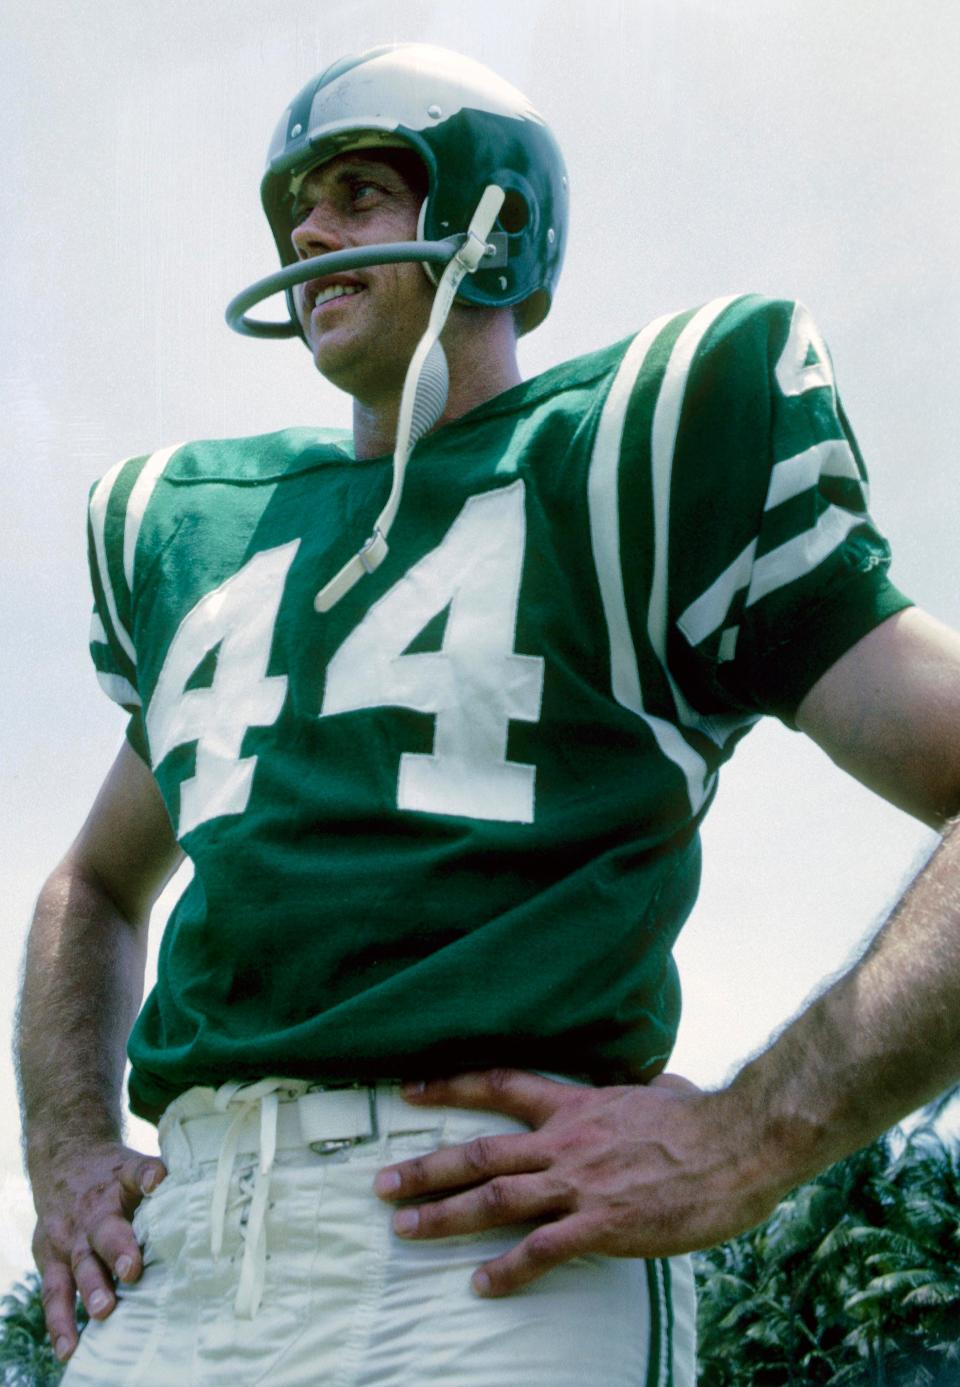 Philadelphia Eagles half back Pete Retzlaff (44) in a photo session during an NFL production in Puerto Rico in May 1966.